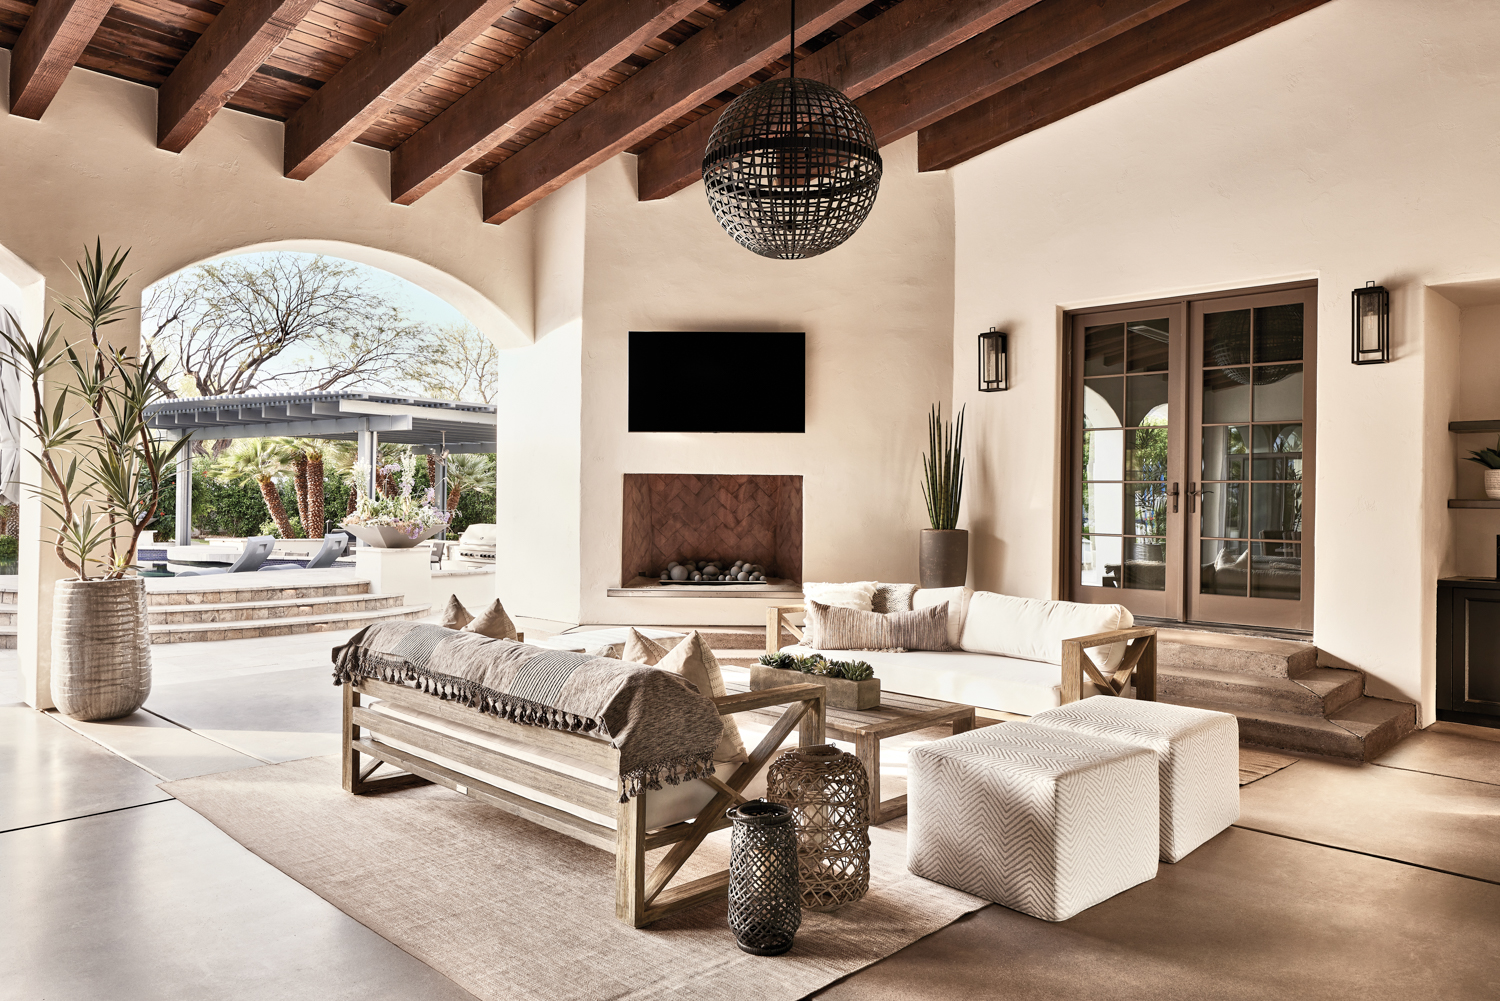 A patio with a television over the fireplace. Two wood-framed sofas upholstered in ivory fabric face each other with a wood coffee table in beetween. Two herringbone-patterned stools sit at the end.